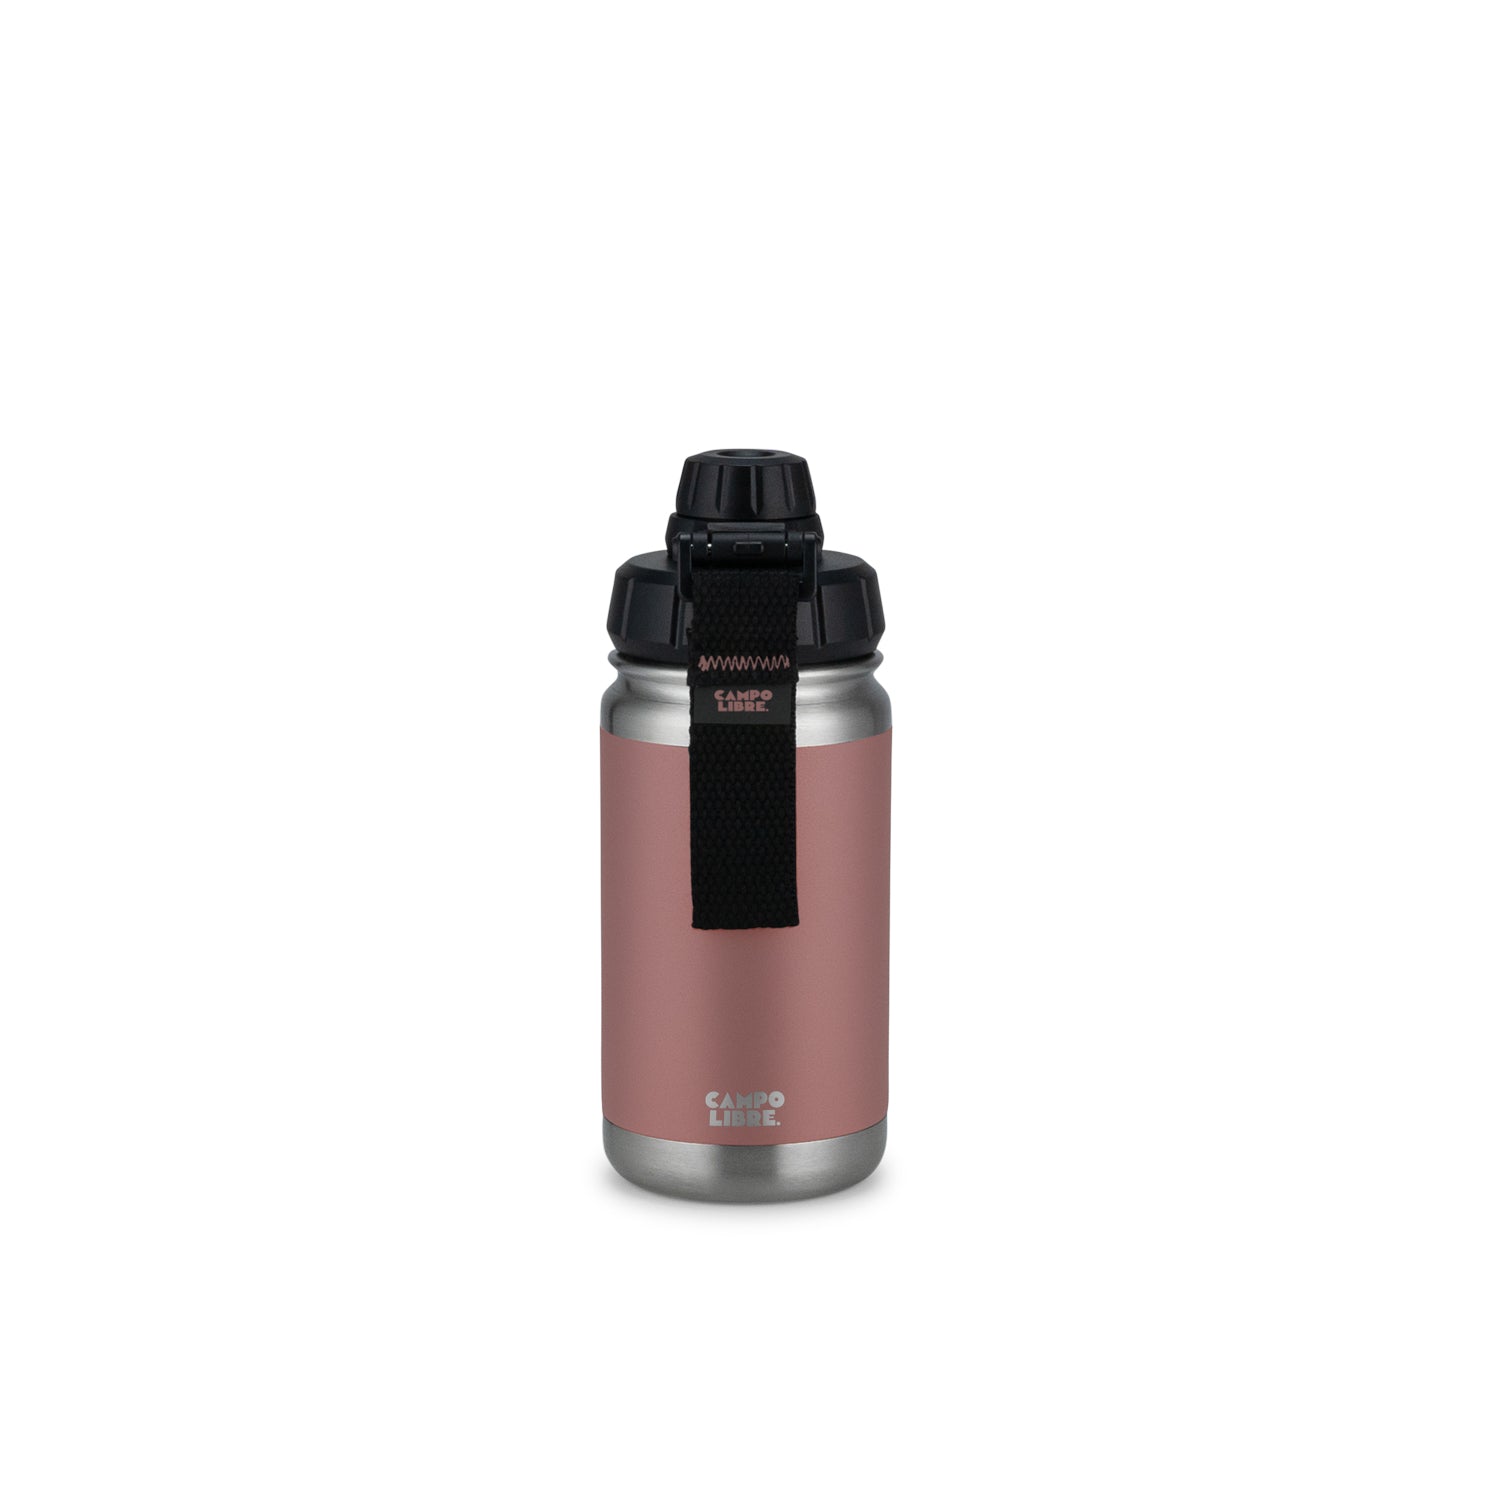 Campo Libre drinking bottle UMBERTO (414ml)